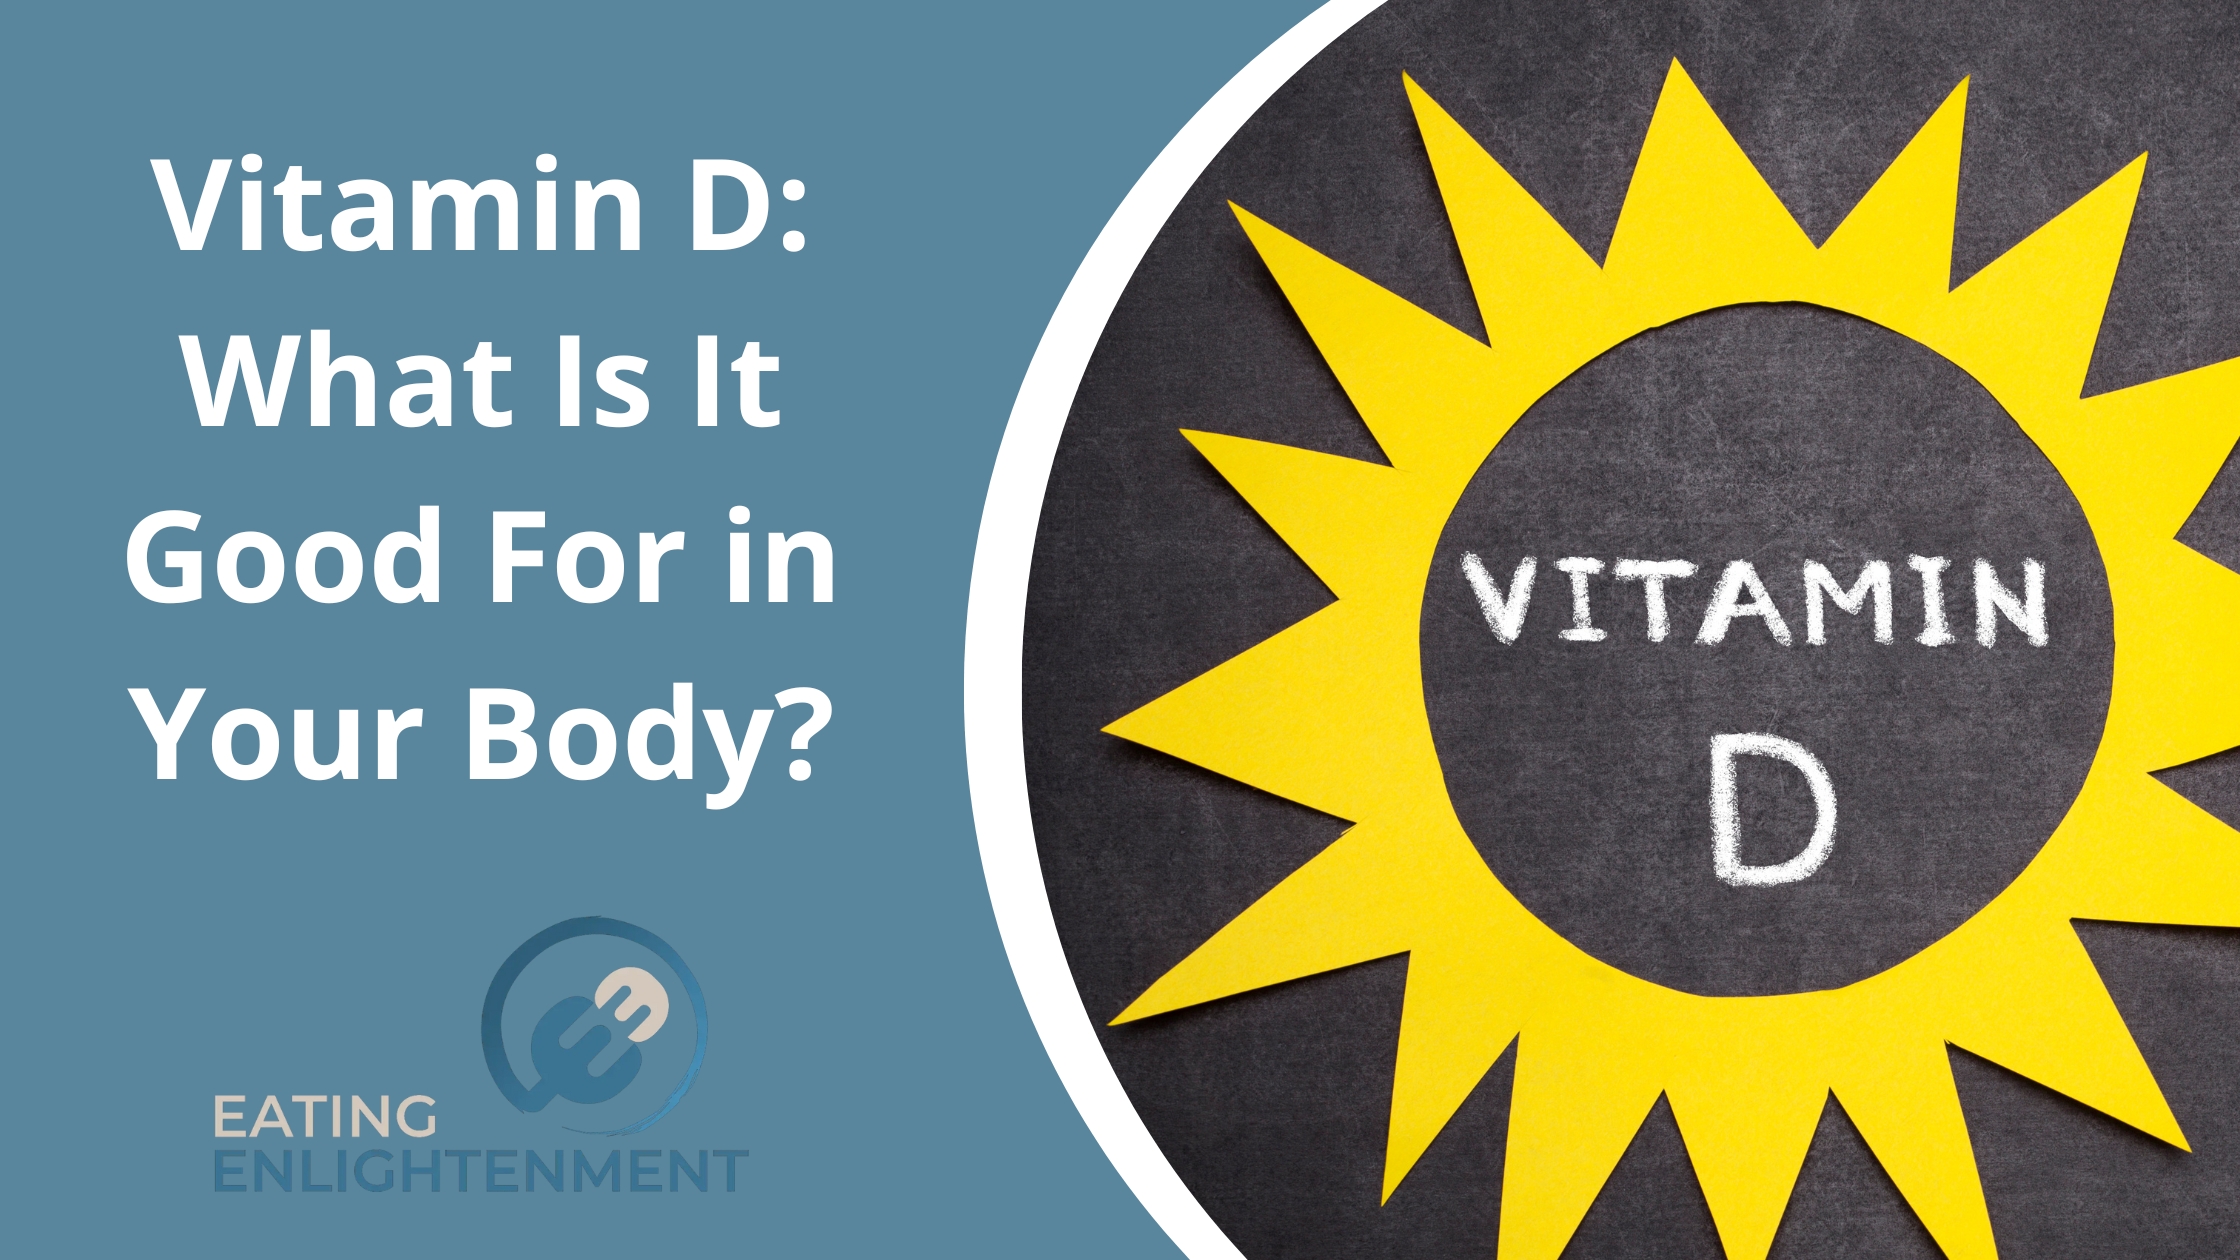 Vitamin D: What Is It Good For in Your Body?